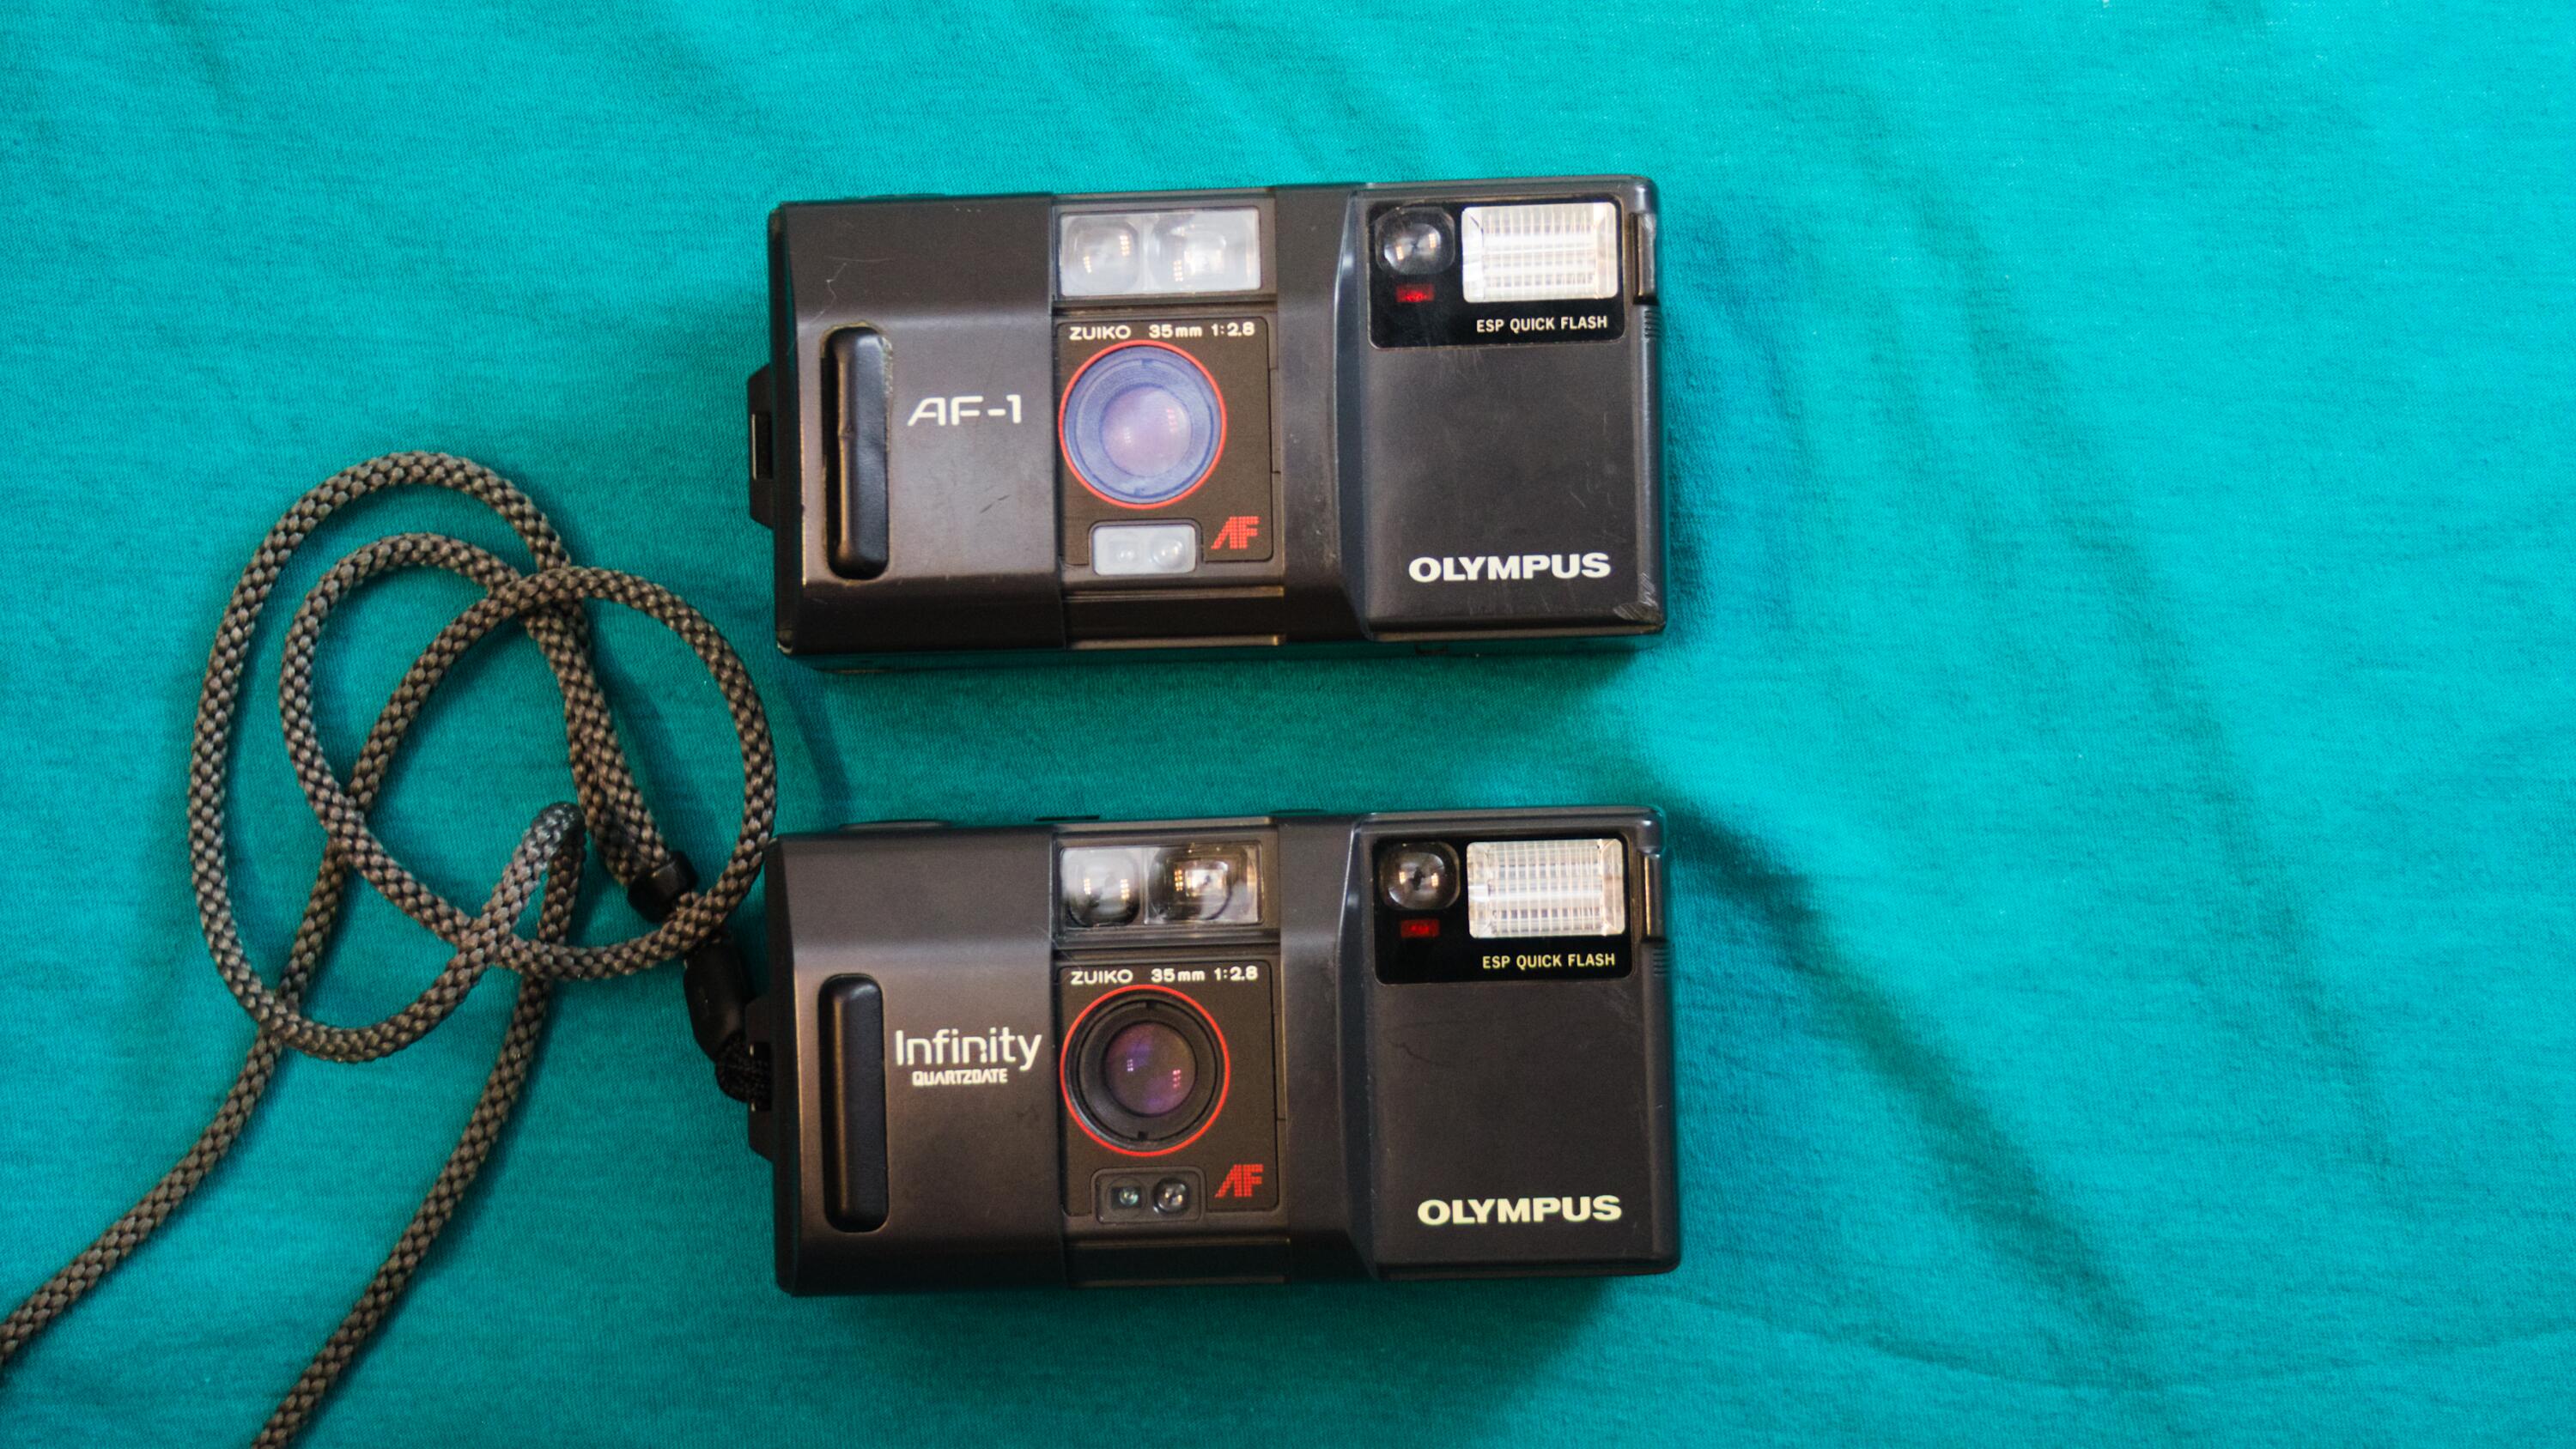 Double feature: Olympus' AF-1, and Infinity Quartzdate